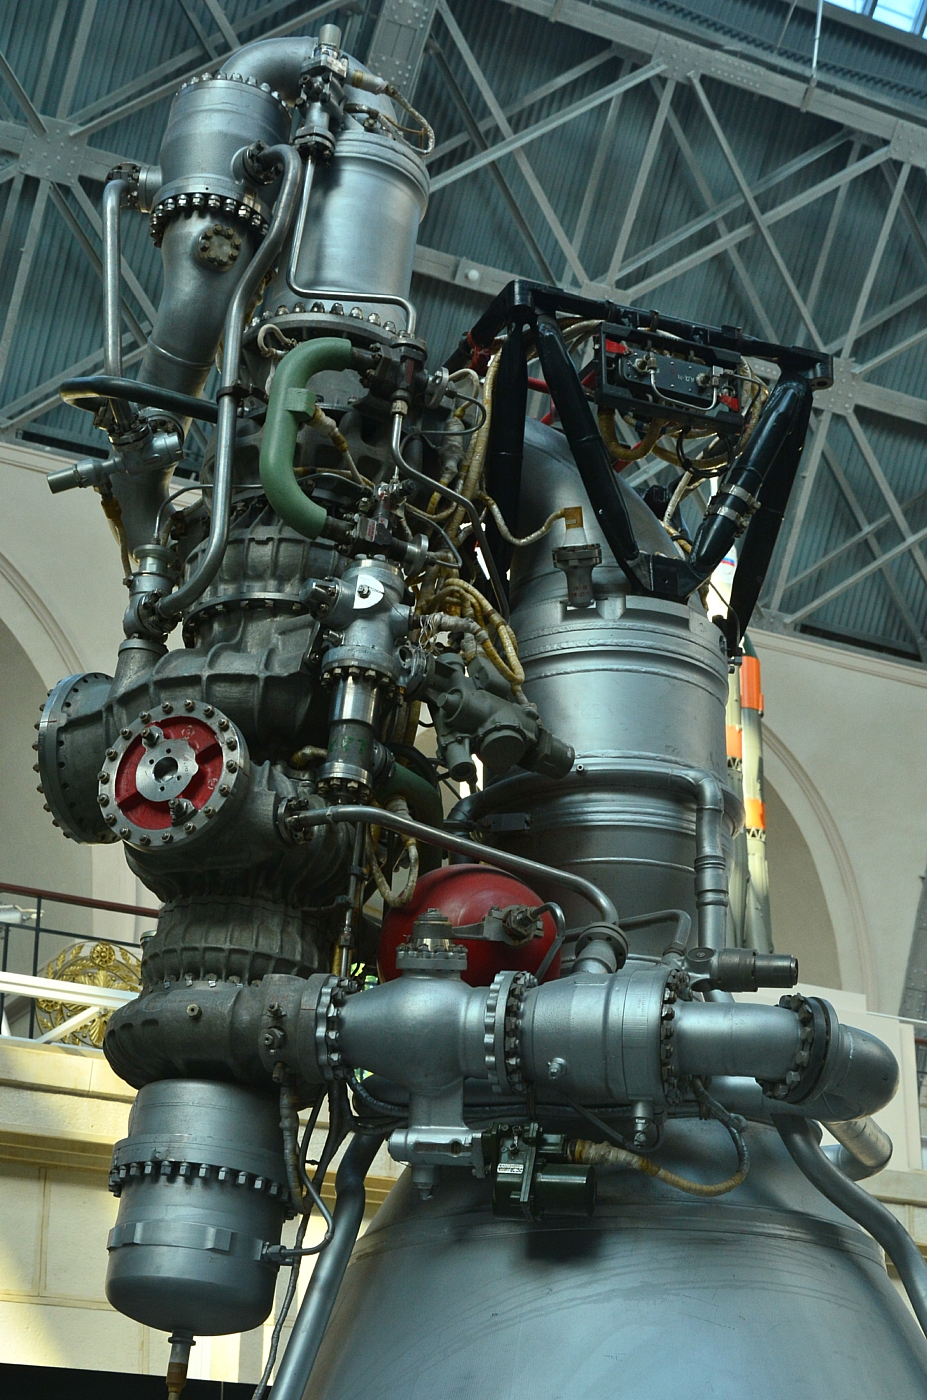 The mechanisms of the rocket engine